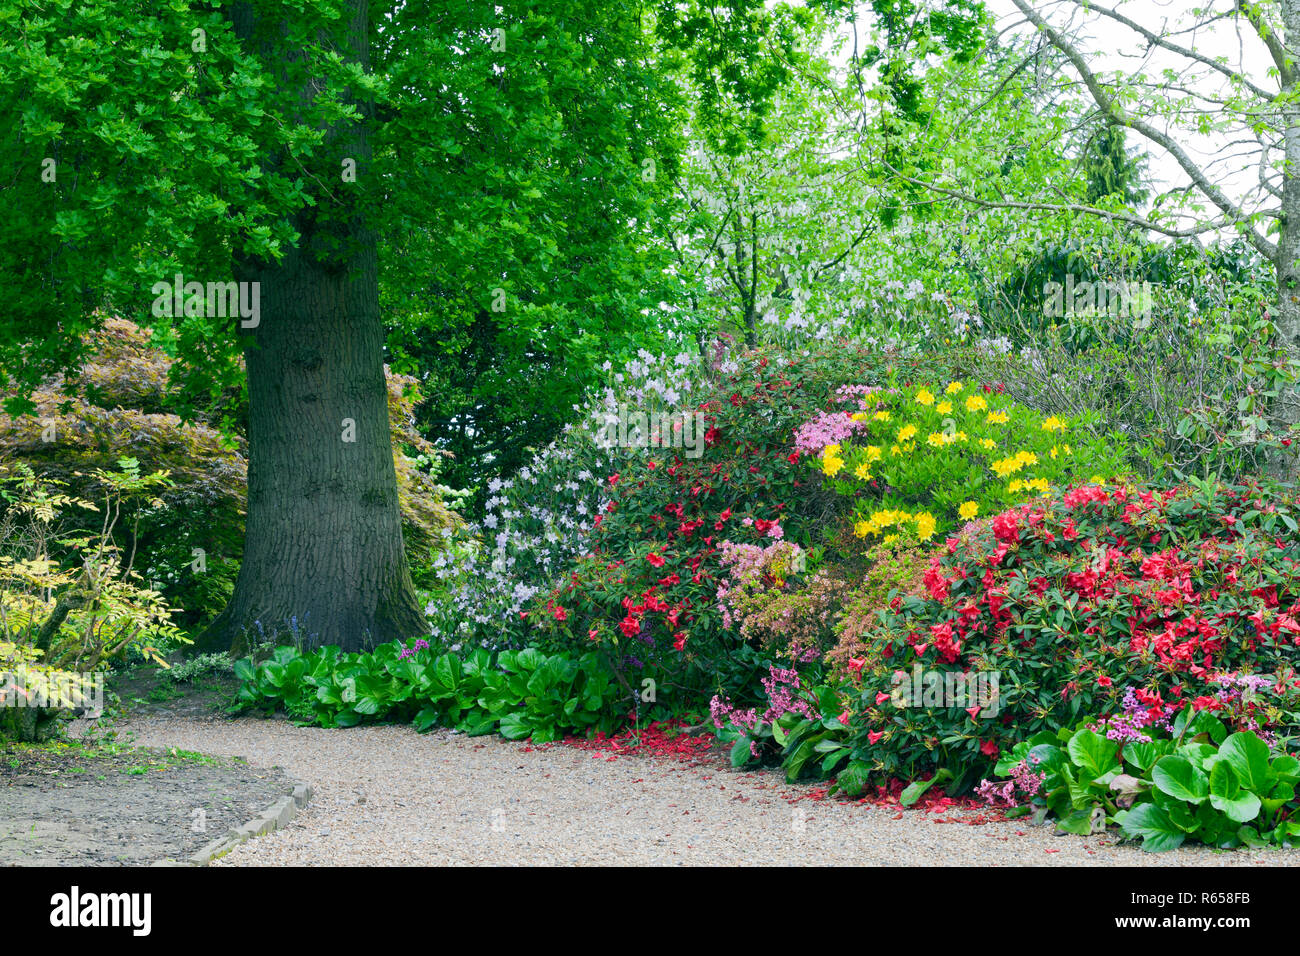 Colourful rhododendrons, azaleas in bloom on a walking path by an oak tree, in a spring lush garden . Stock Photo